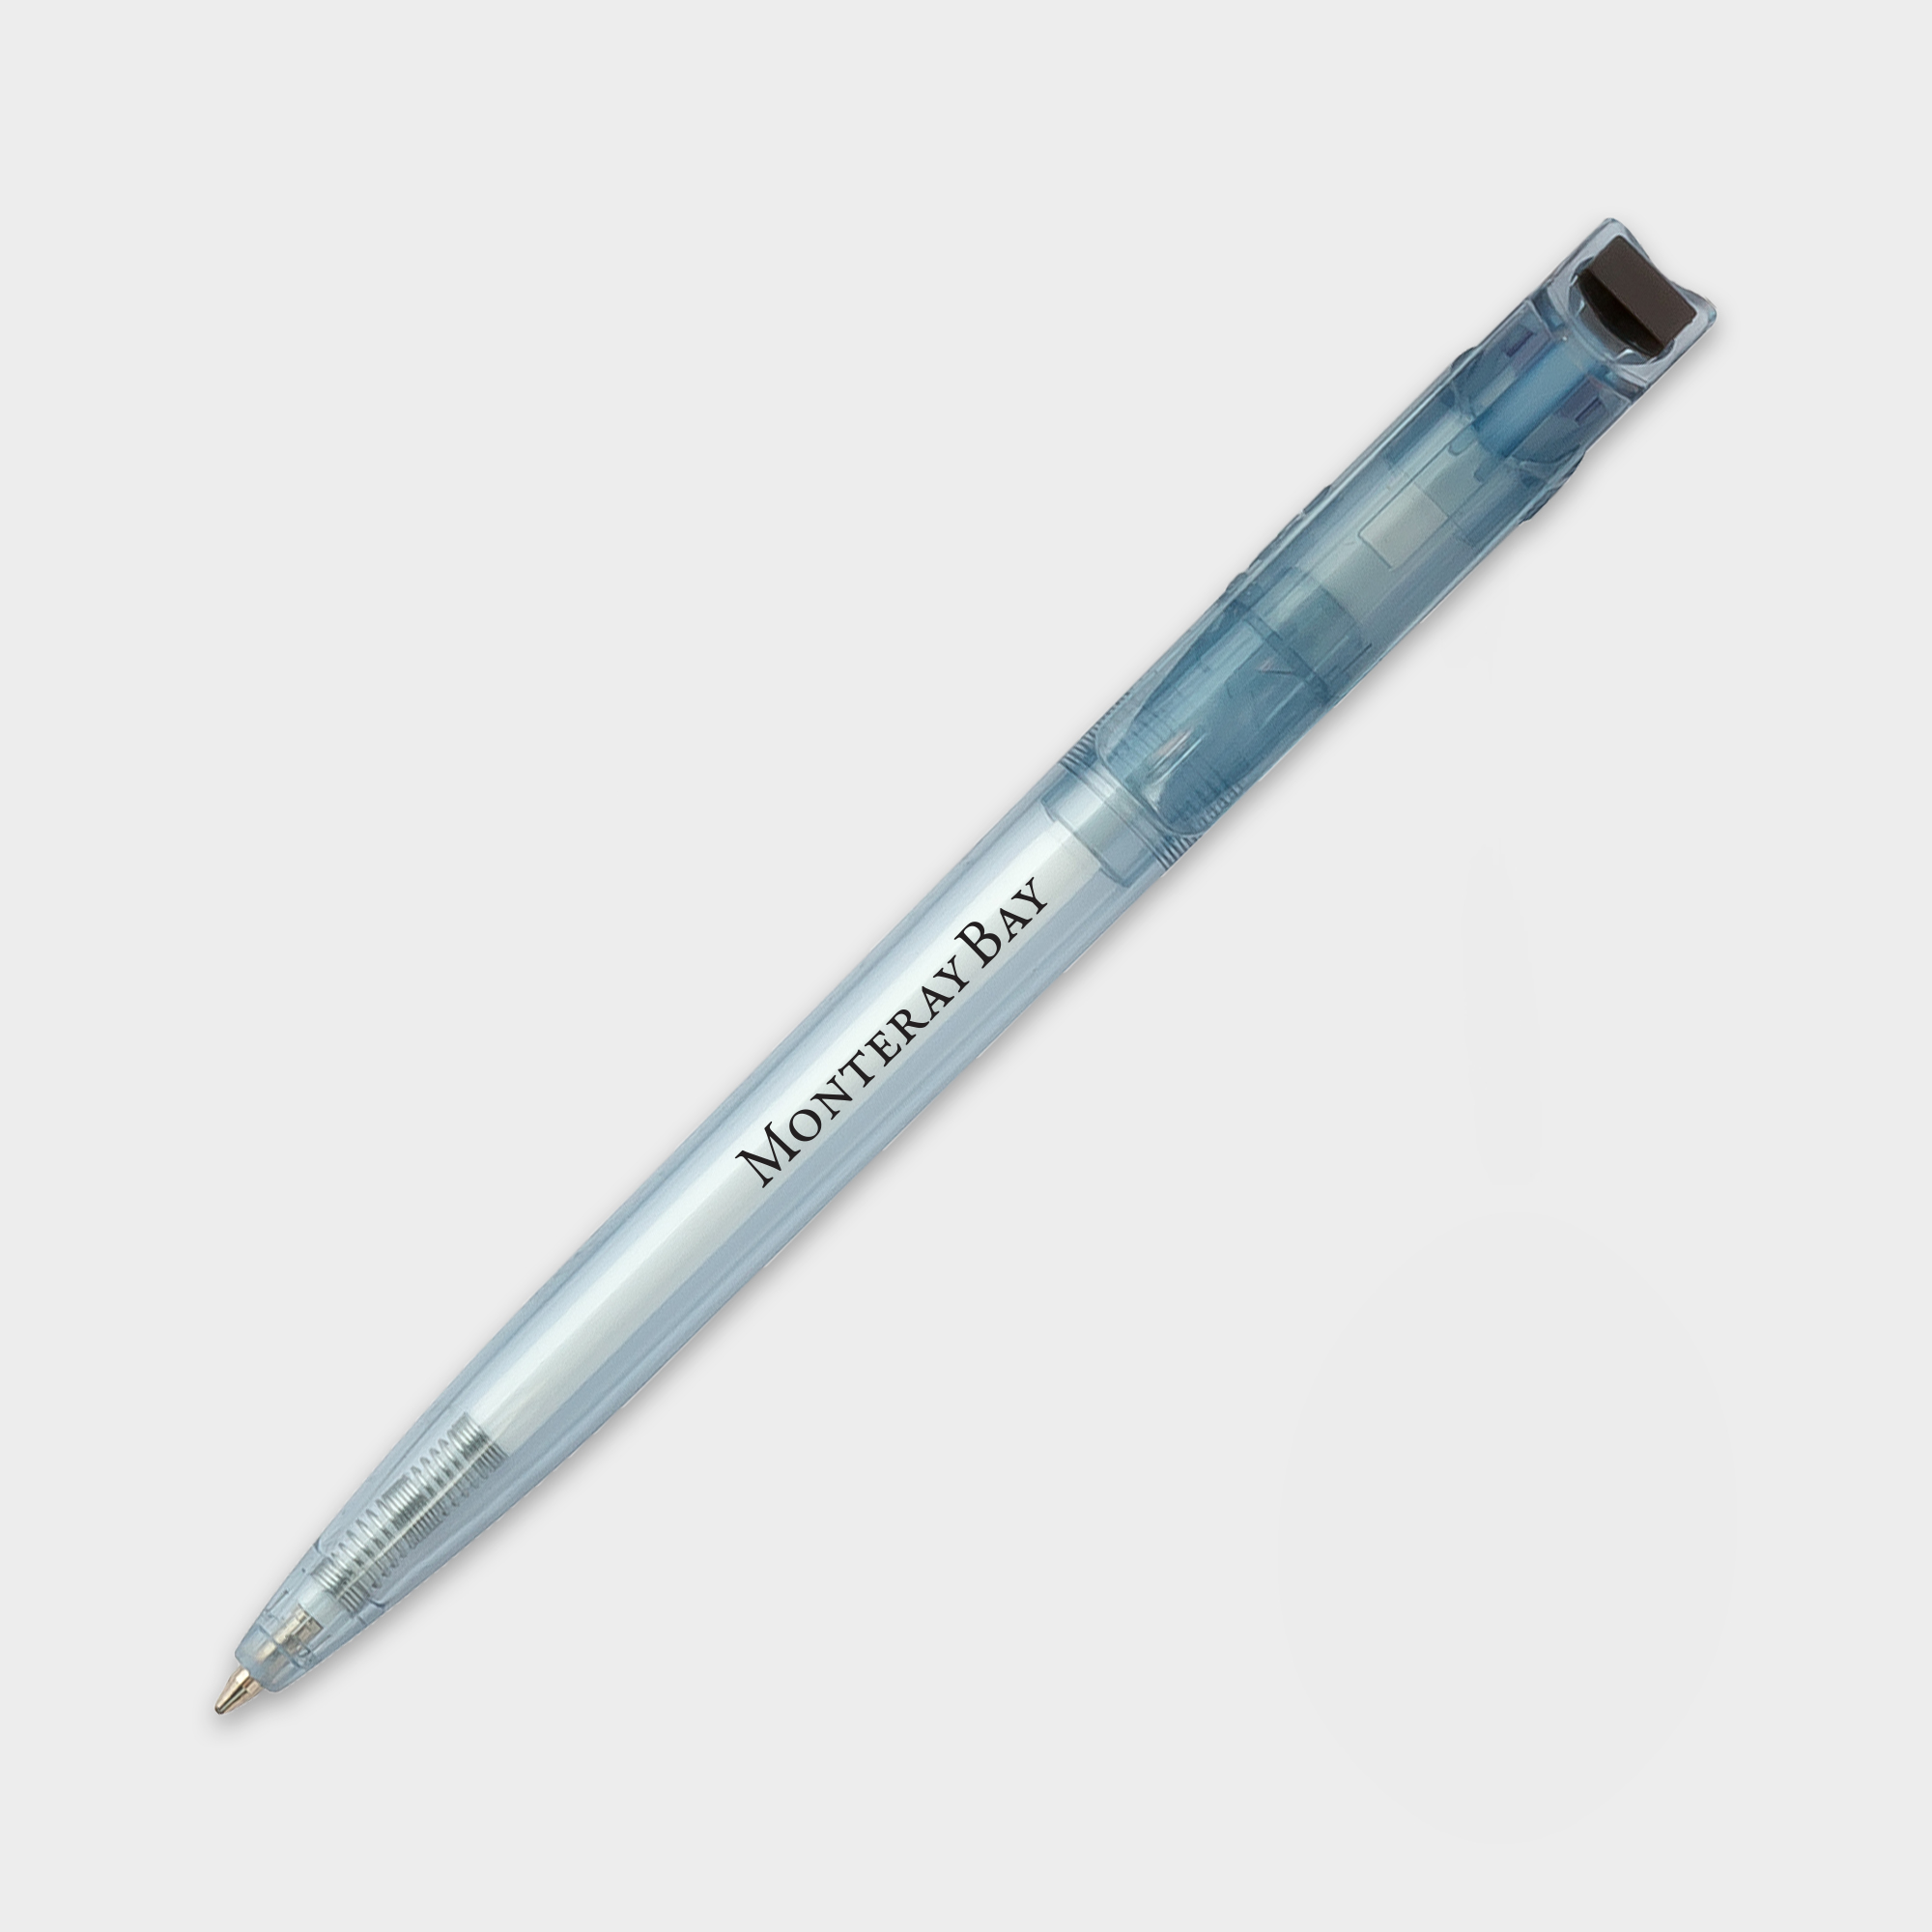 The Green & Good Litani Pen. An eco-friendly and high-quality pen made from recycled plastic bottles (rPET) with black ink refills and a light blue body with coloured tip. Made in the EU and available with a variety of different tip colours. Black